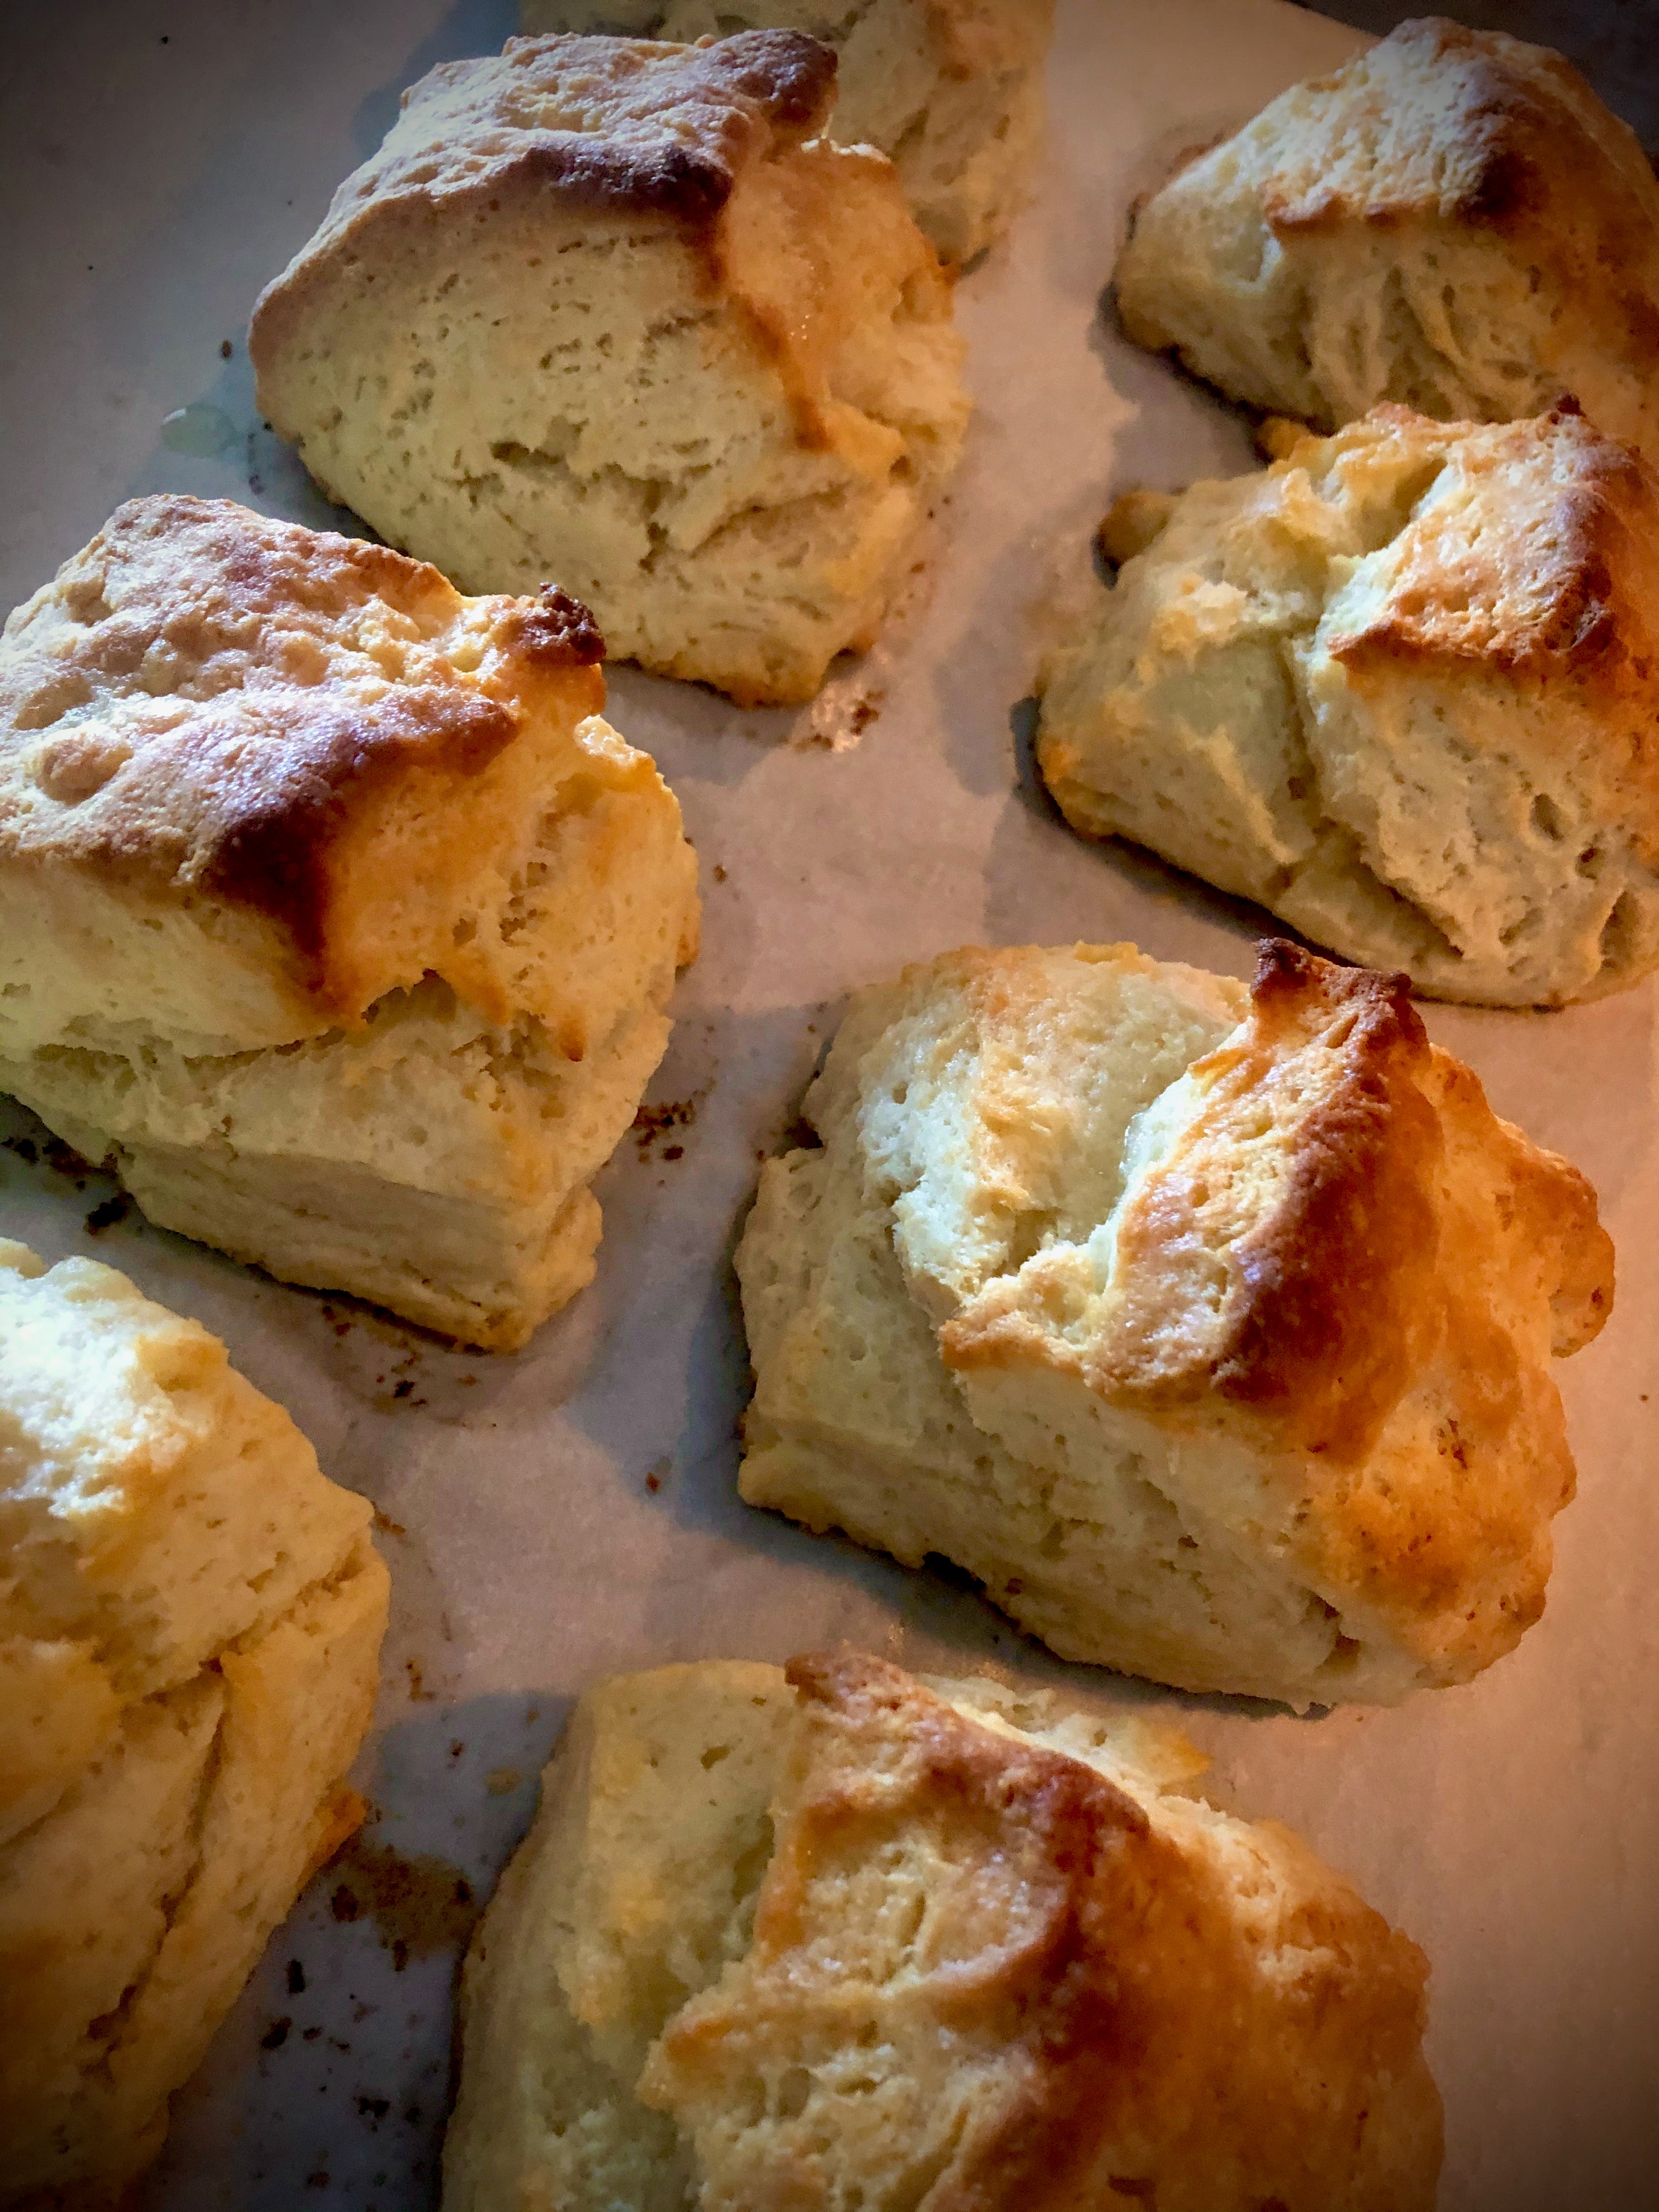 Biscuits are light an flaky and are best enjoyed the same day. They come plain or savory.